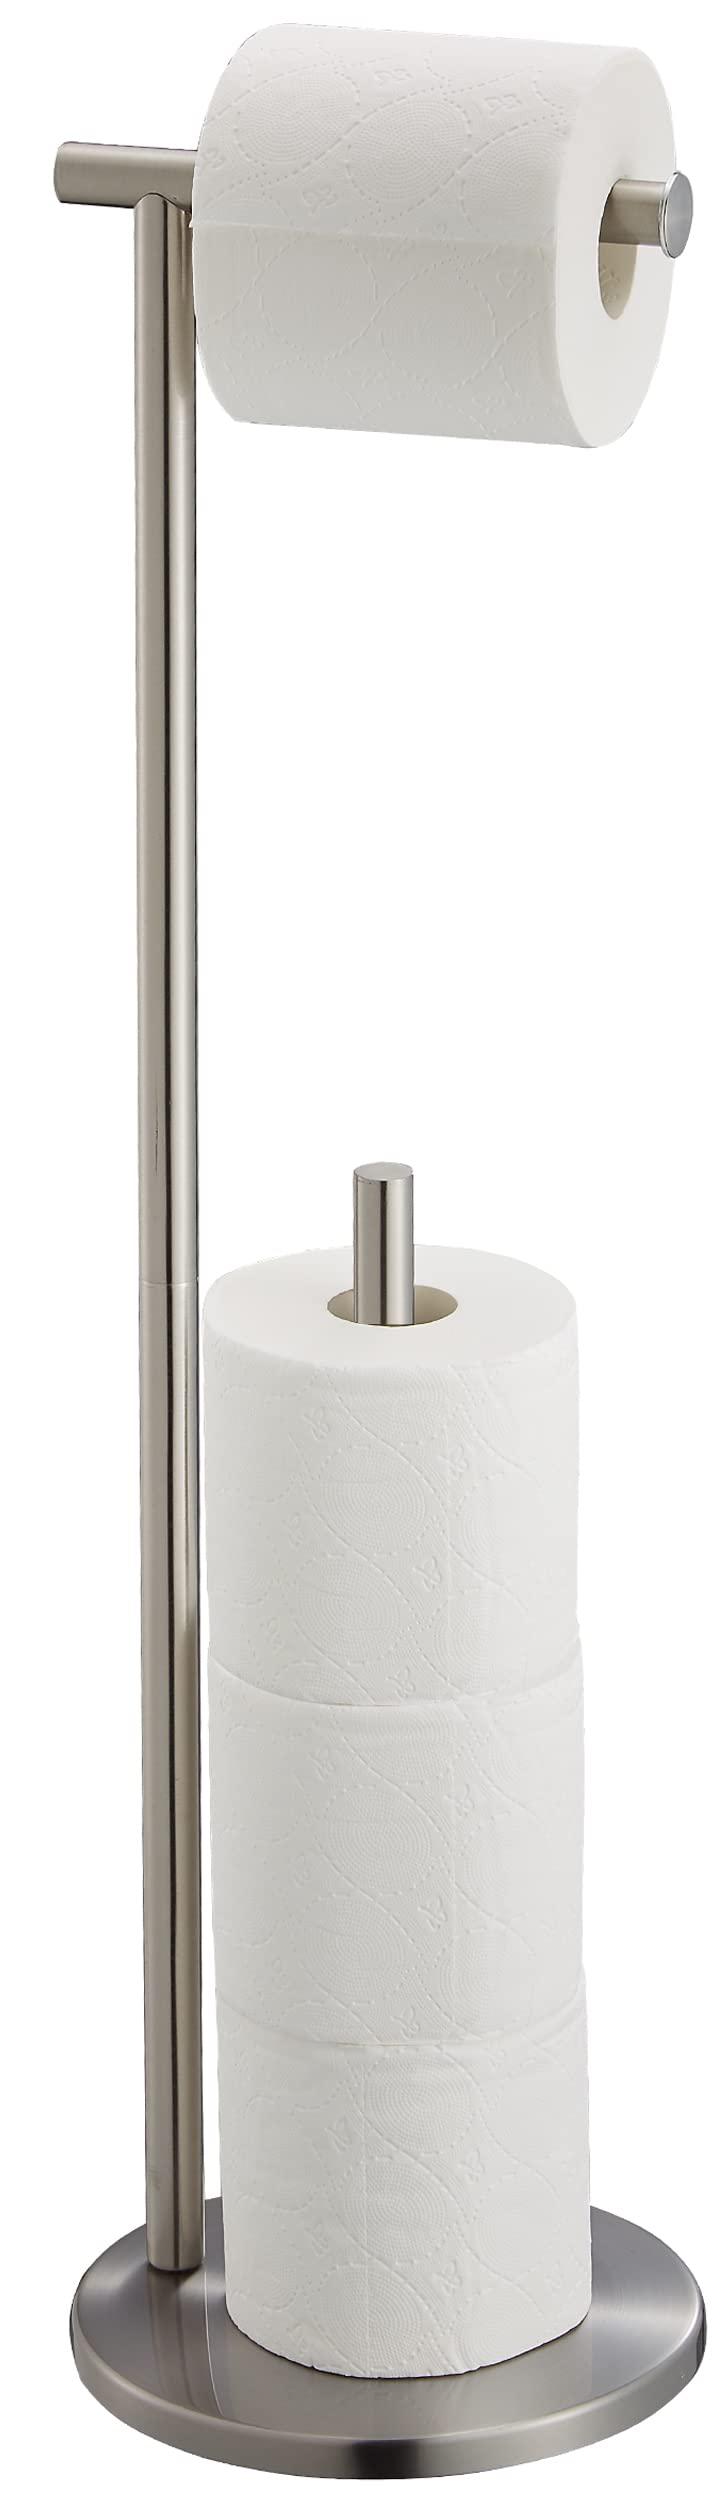 DECLUTTR free standing toilet paper holder stand with reserve, bathroom tissue dispenser paper roll storage holder stand for jumbo rol